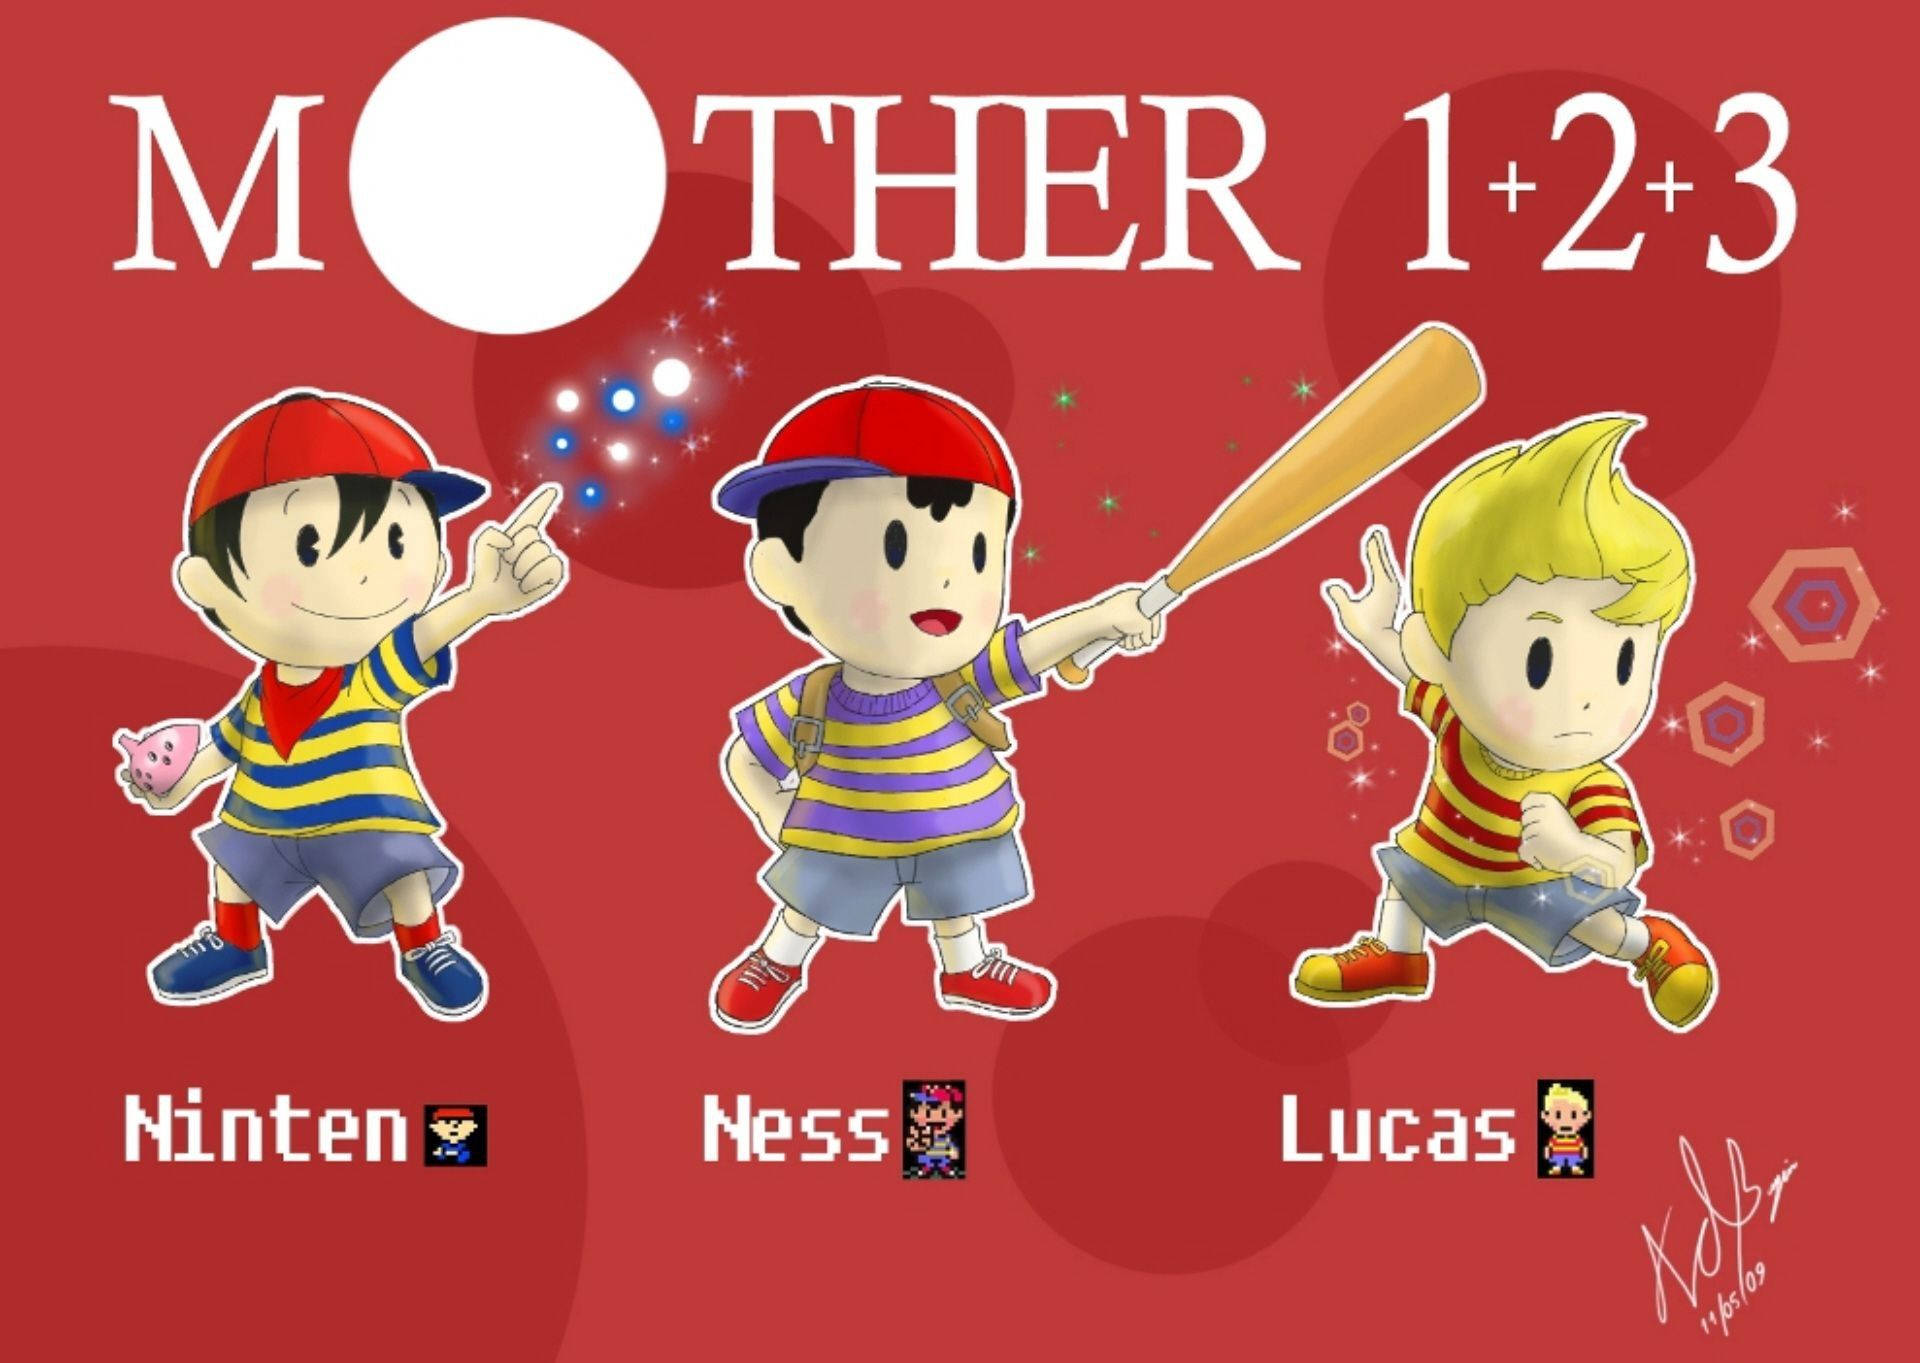 Earthbound Mother 1+2+3 Poster Background